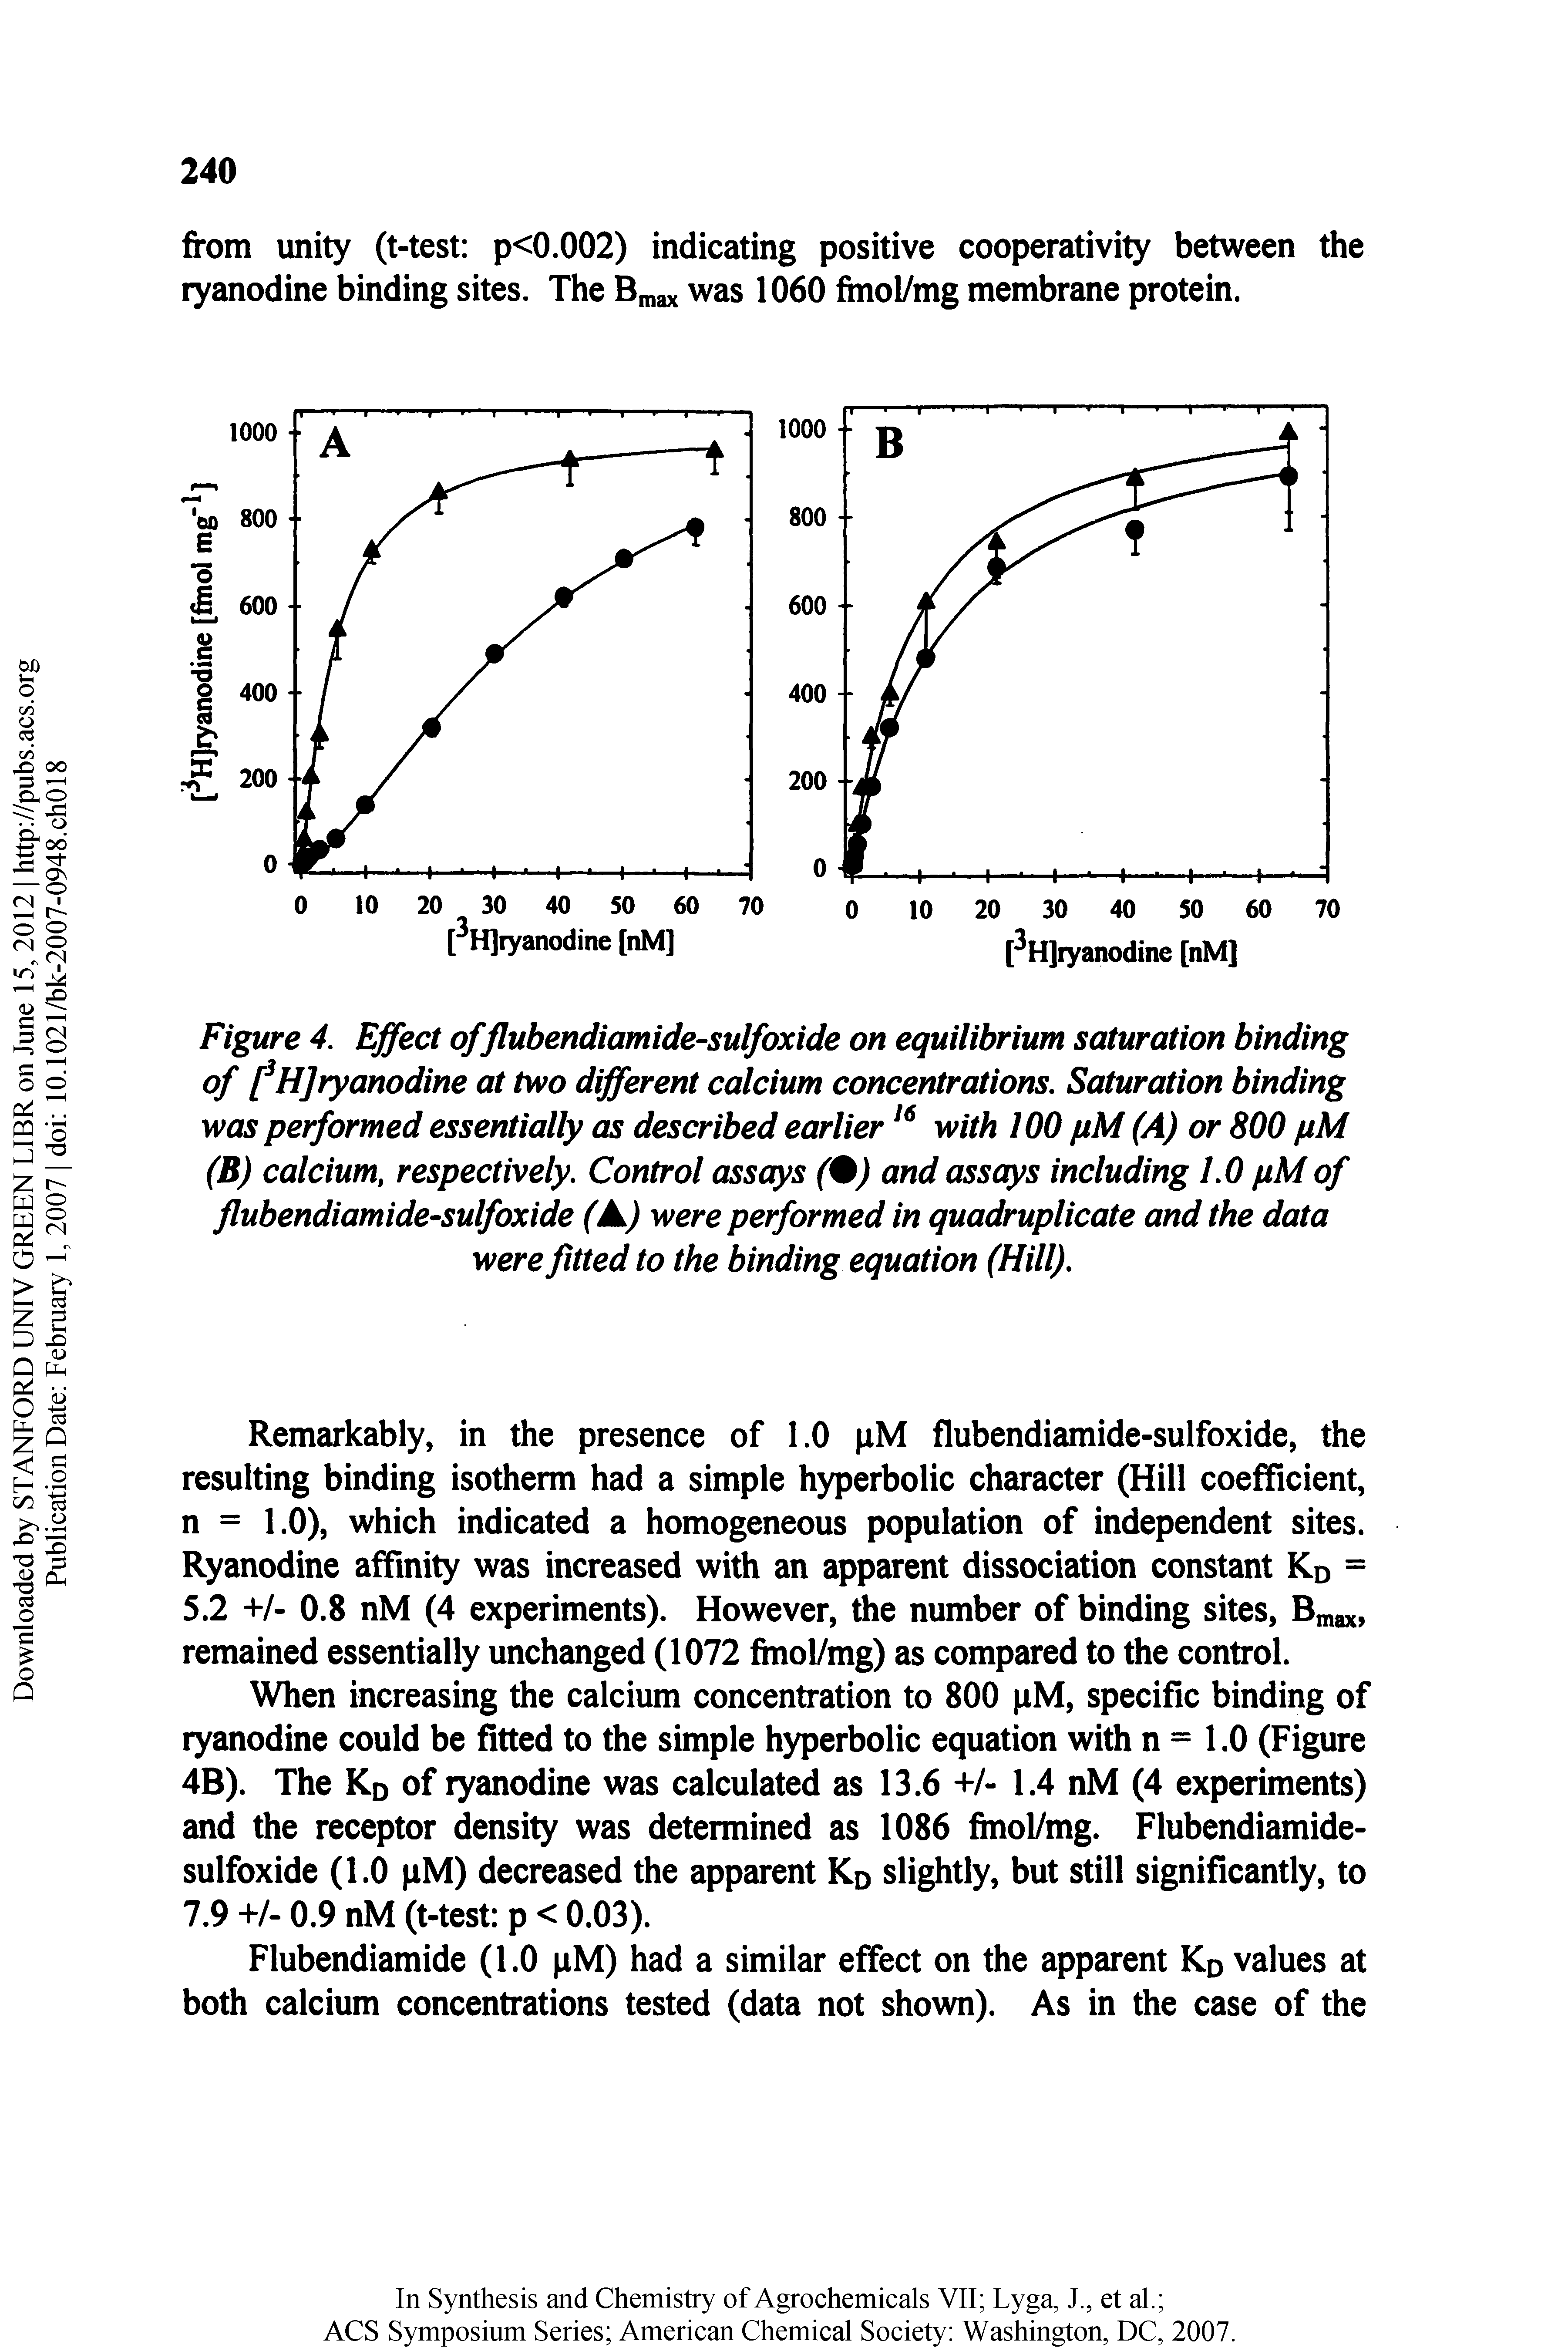 Figure 4. Effect of flubendiamide-sulfoxide on equilibrium saturation binding of fHJryanodine at two different calcium concentrations. Saturation binding was performed essentially as described earlier with 100 pM (A) or 800 pM (B) calcium, respectively. Control asst s (9) and assess including 1.0 pM of flubendiamide-sulfoxide (A.) were performed in quadruplicate and the data were fitted to the binding equation (Hill).